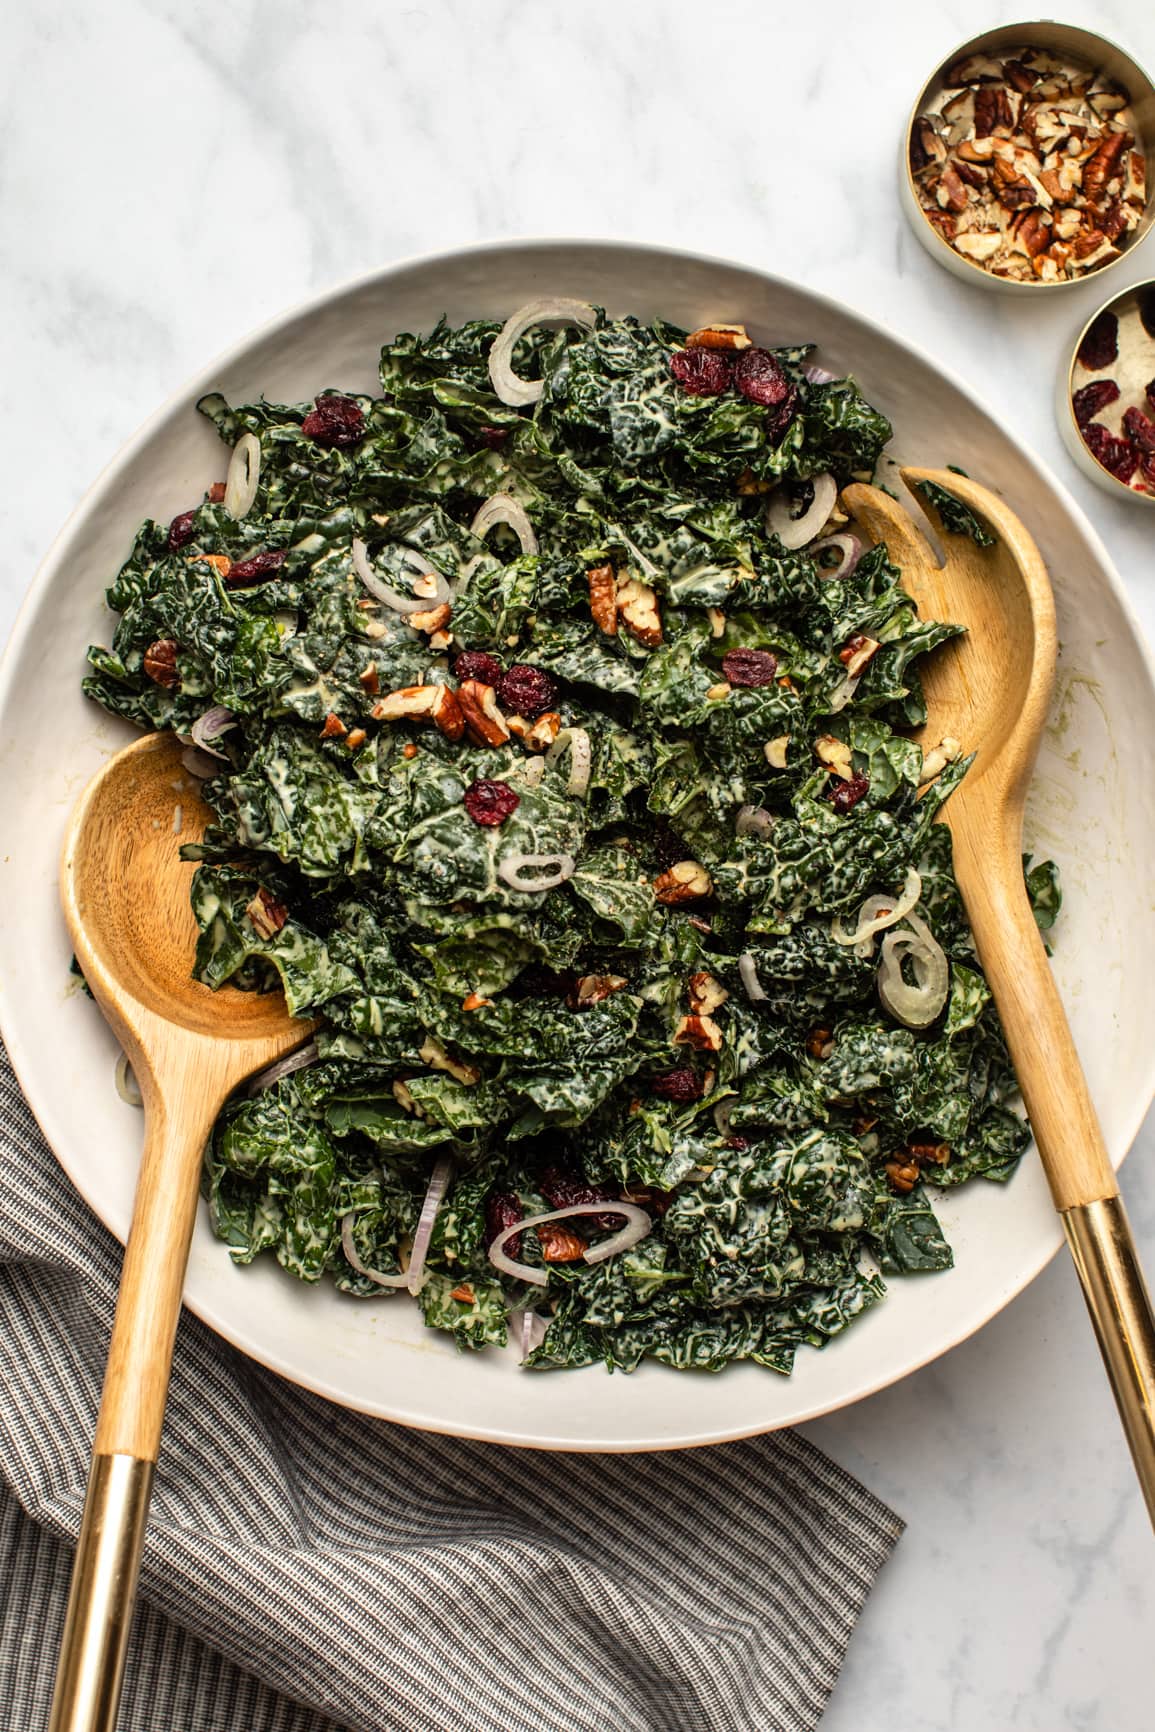 massaged kale cranberry salad in large white bowl with wooden serving spoons